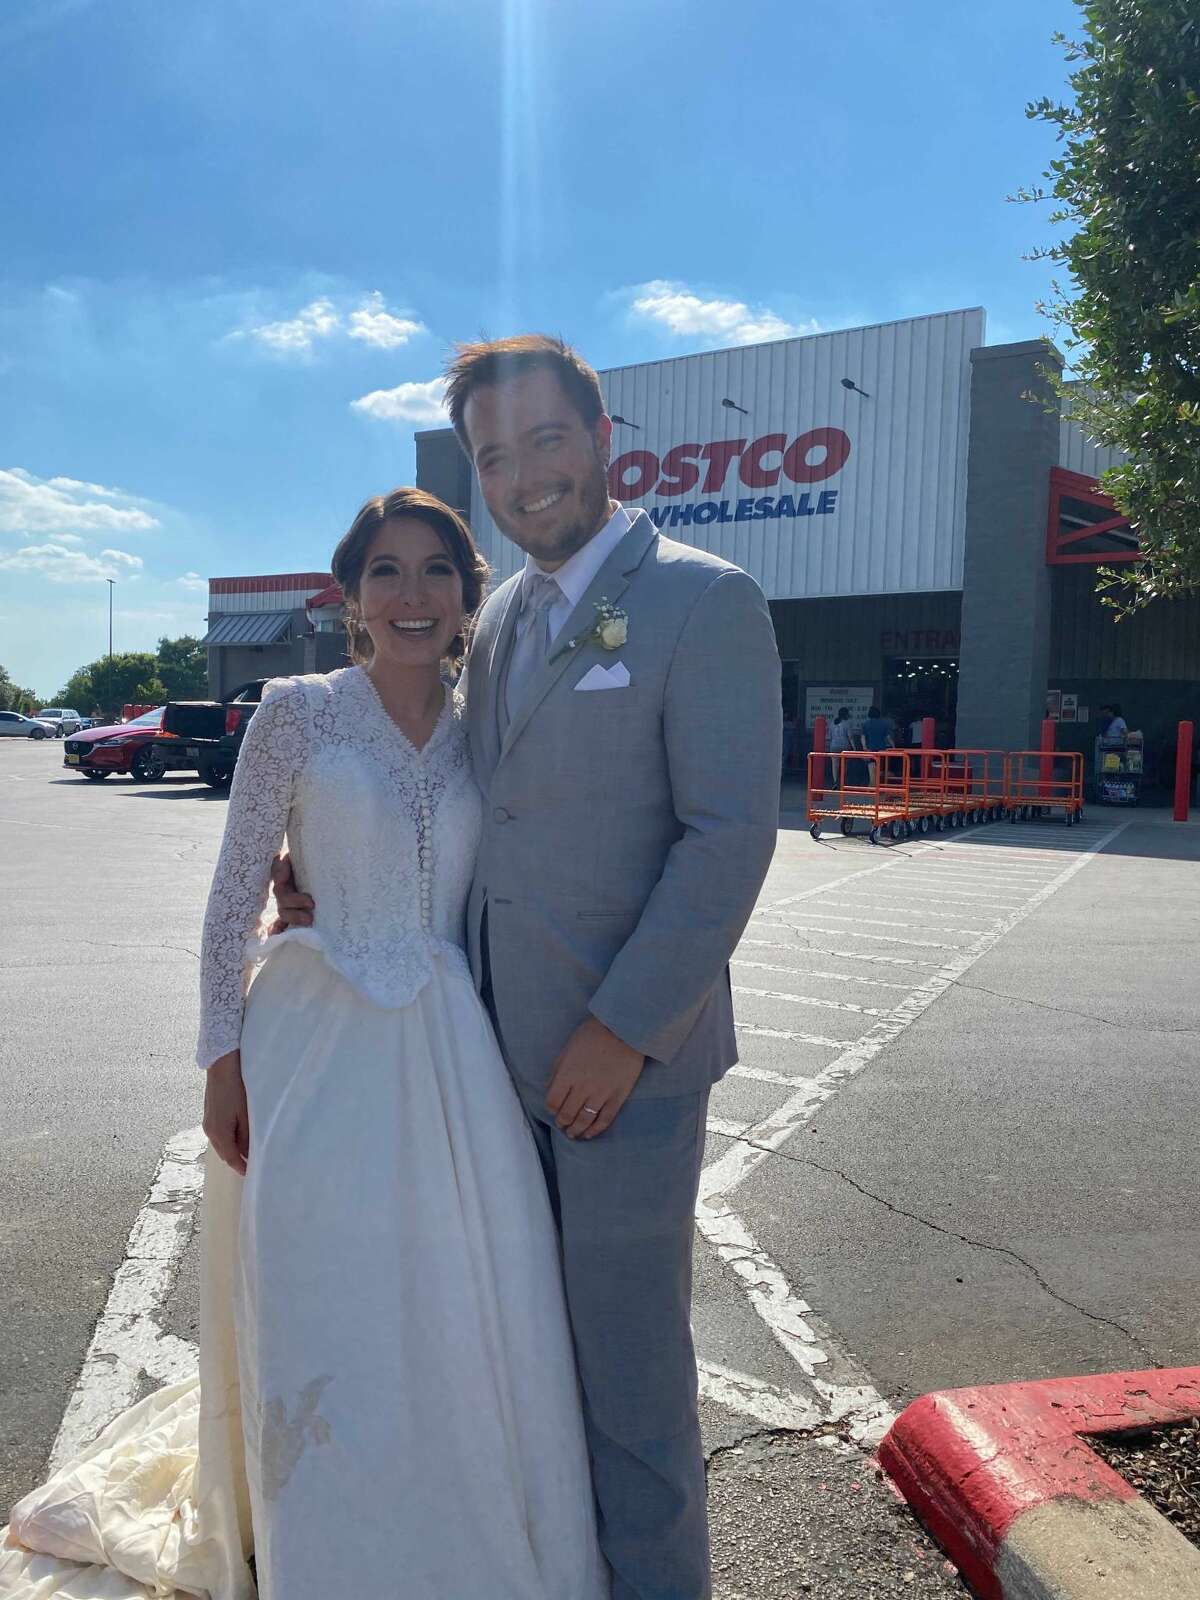 Mariana and her husband Gerado made a stop at Costco after their wedding.   